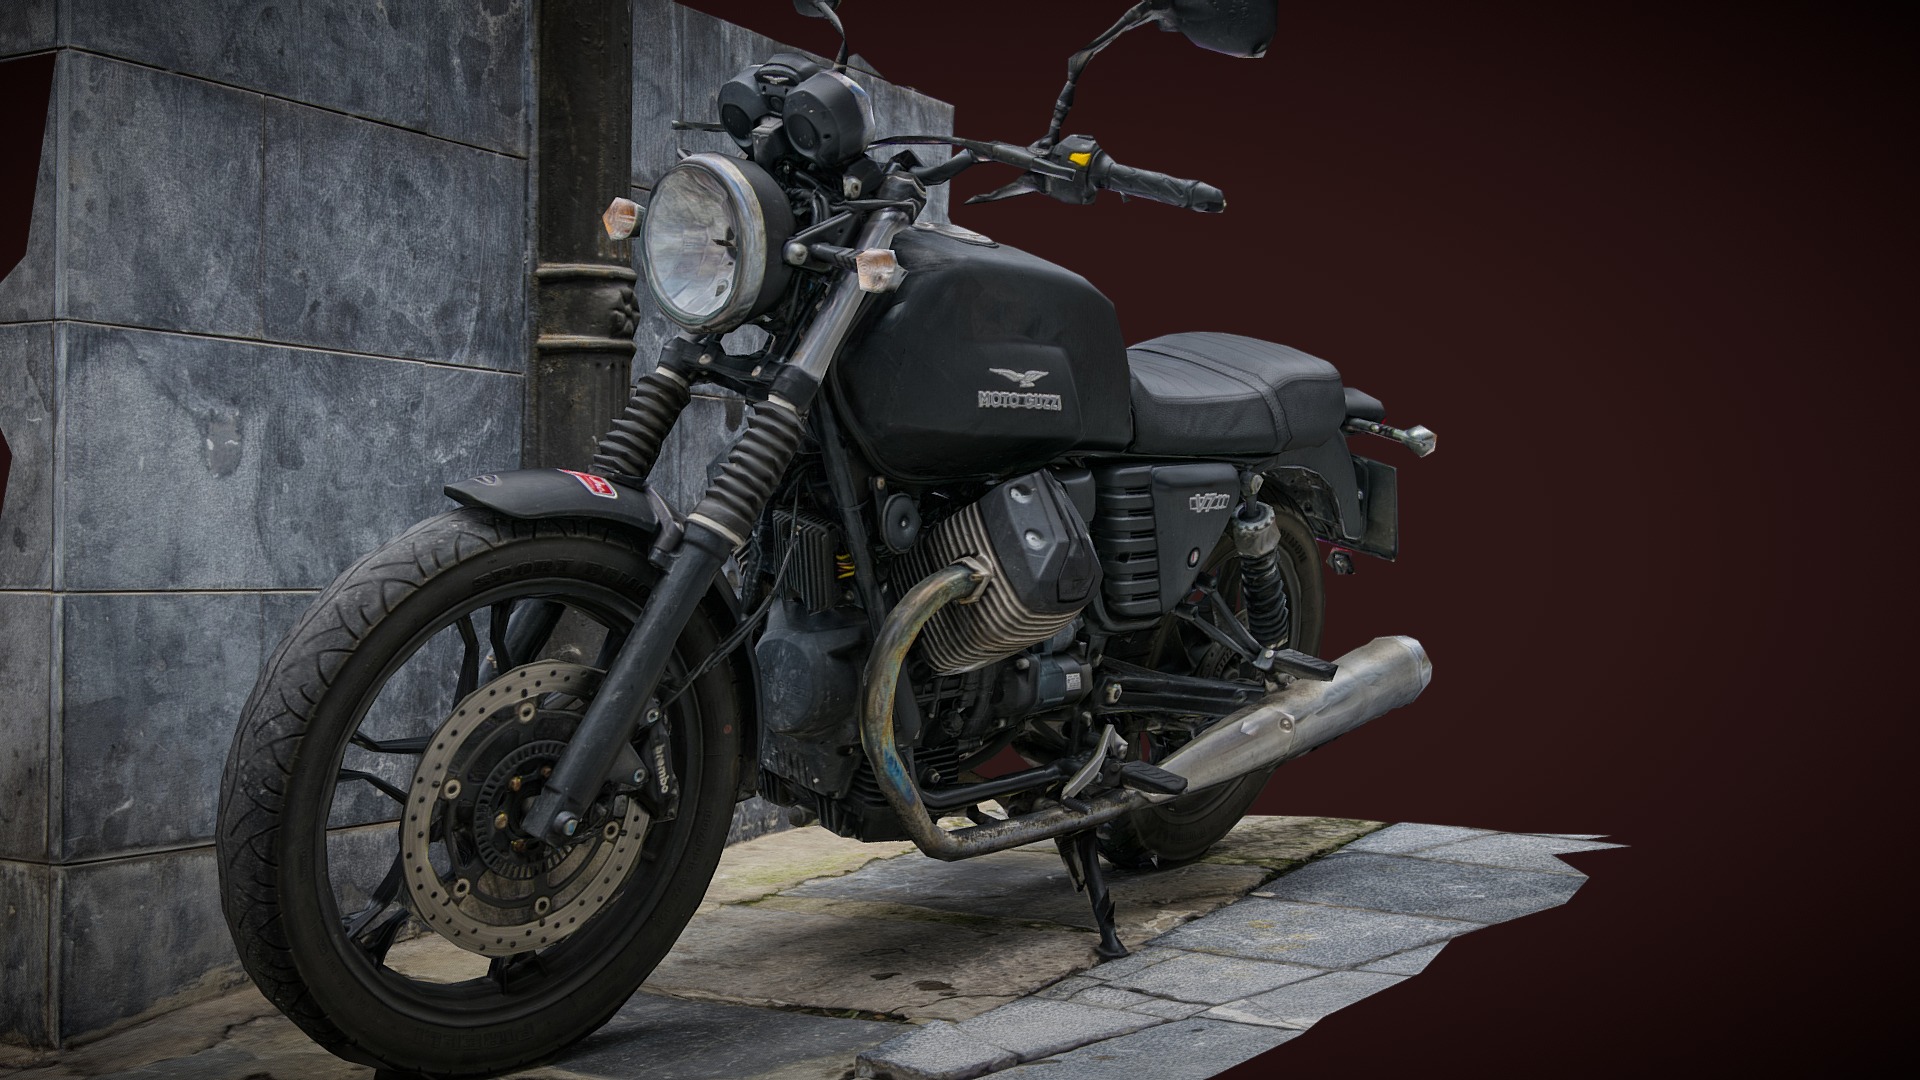 3D model MOTO GUZZI V7 photogrammetry scan - This is a 3D model of the MOTO GUZZI V7 photogrammetry scan. The 3D model is about a motorcycle parked on a sidewalk.